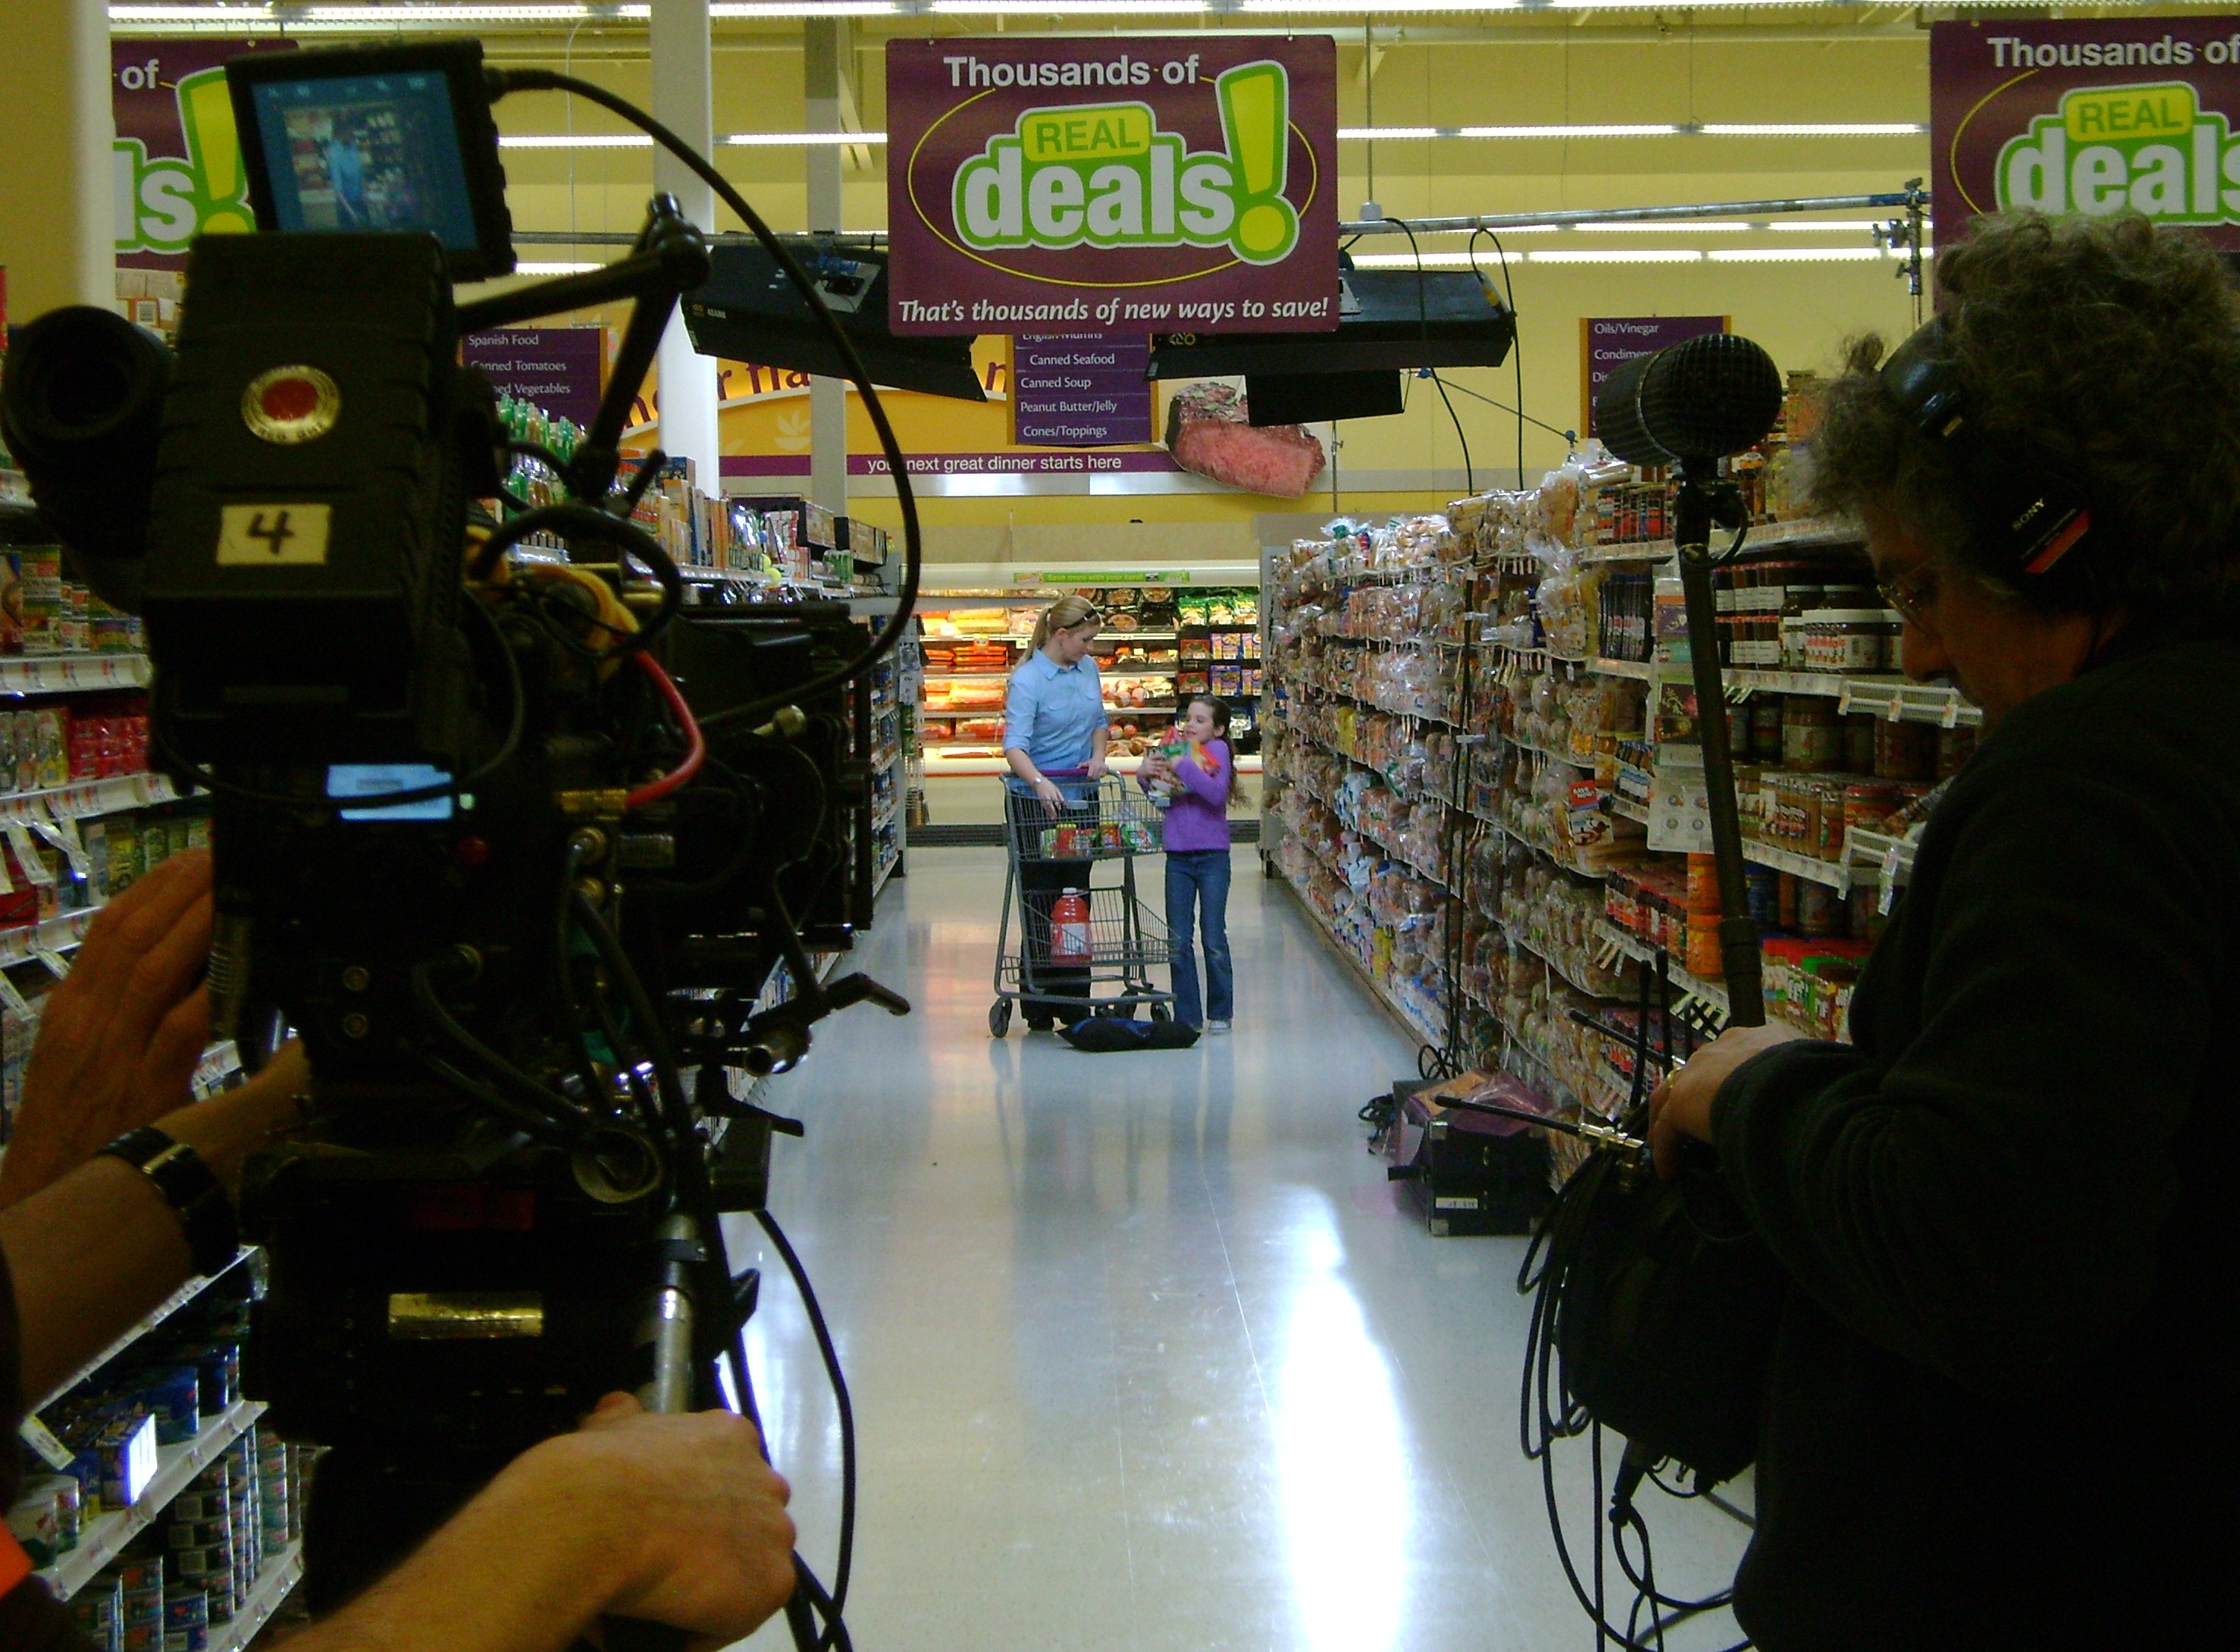 Leila Lead in ConAgra Commercial by NBC